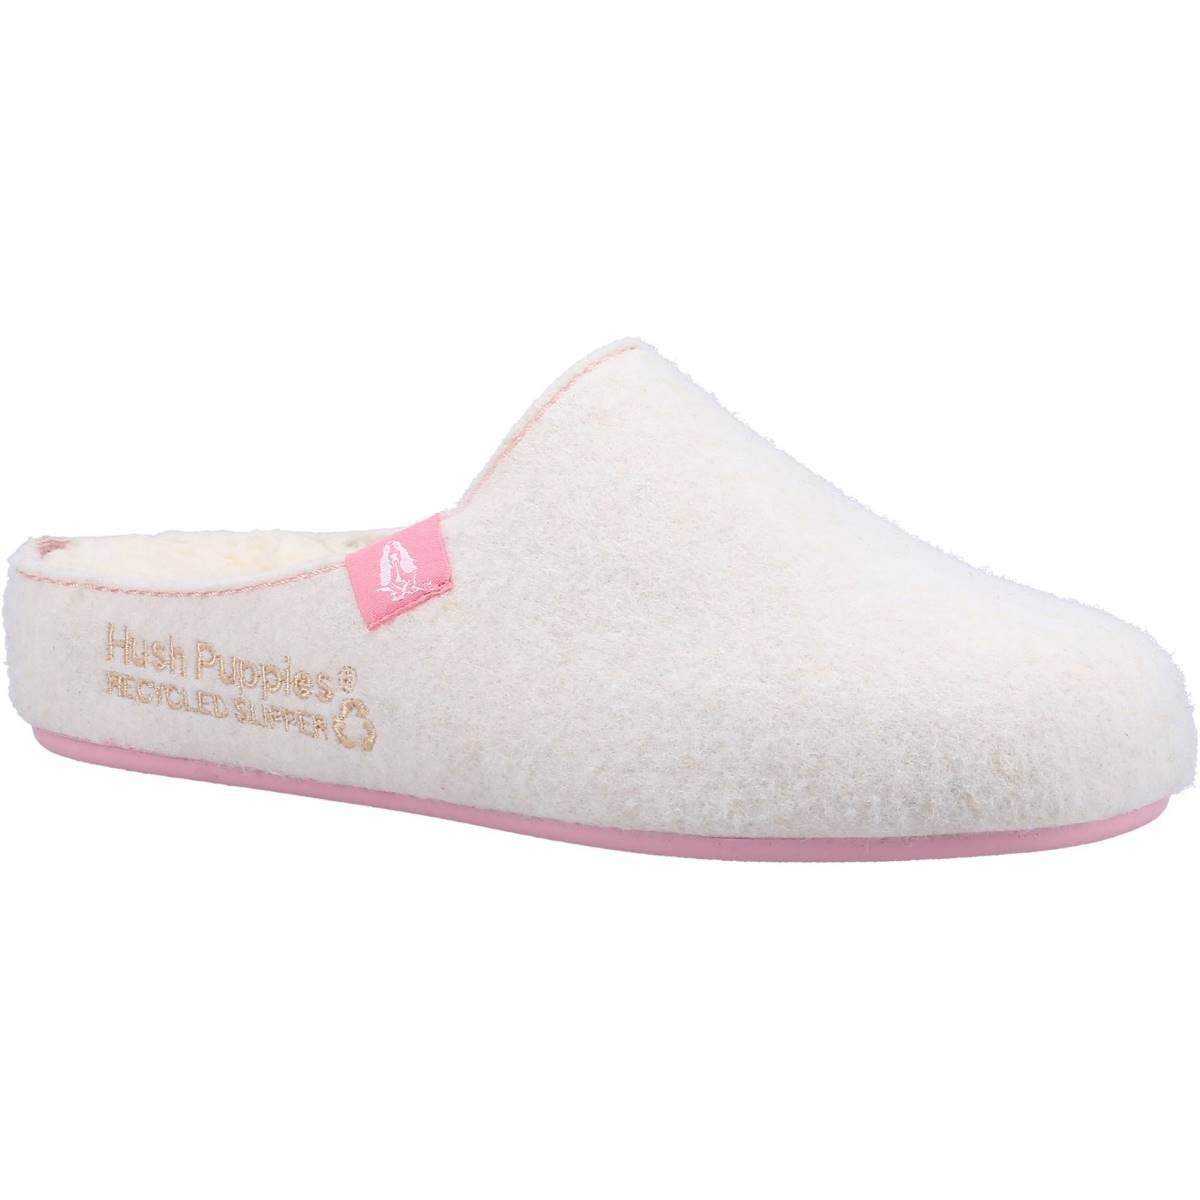 Hush Puppies The Good Slipper Beige Womens slippers HPW1000-189-5 in a Plain Textile in Size 6